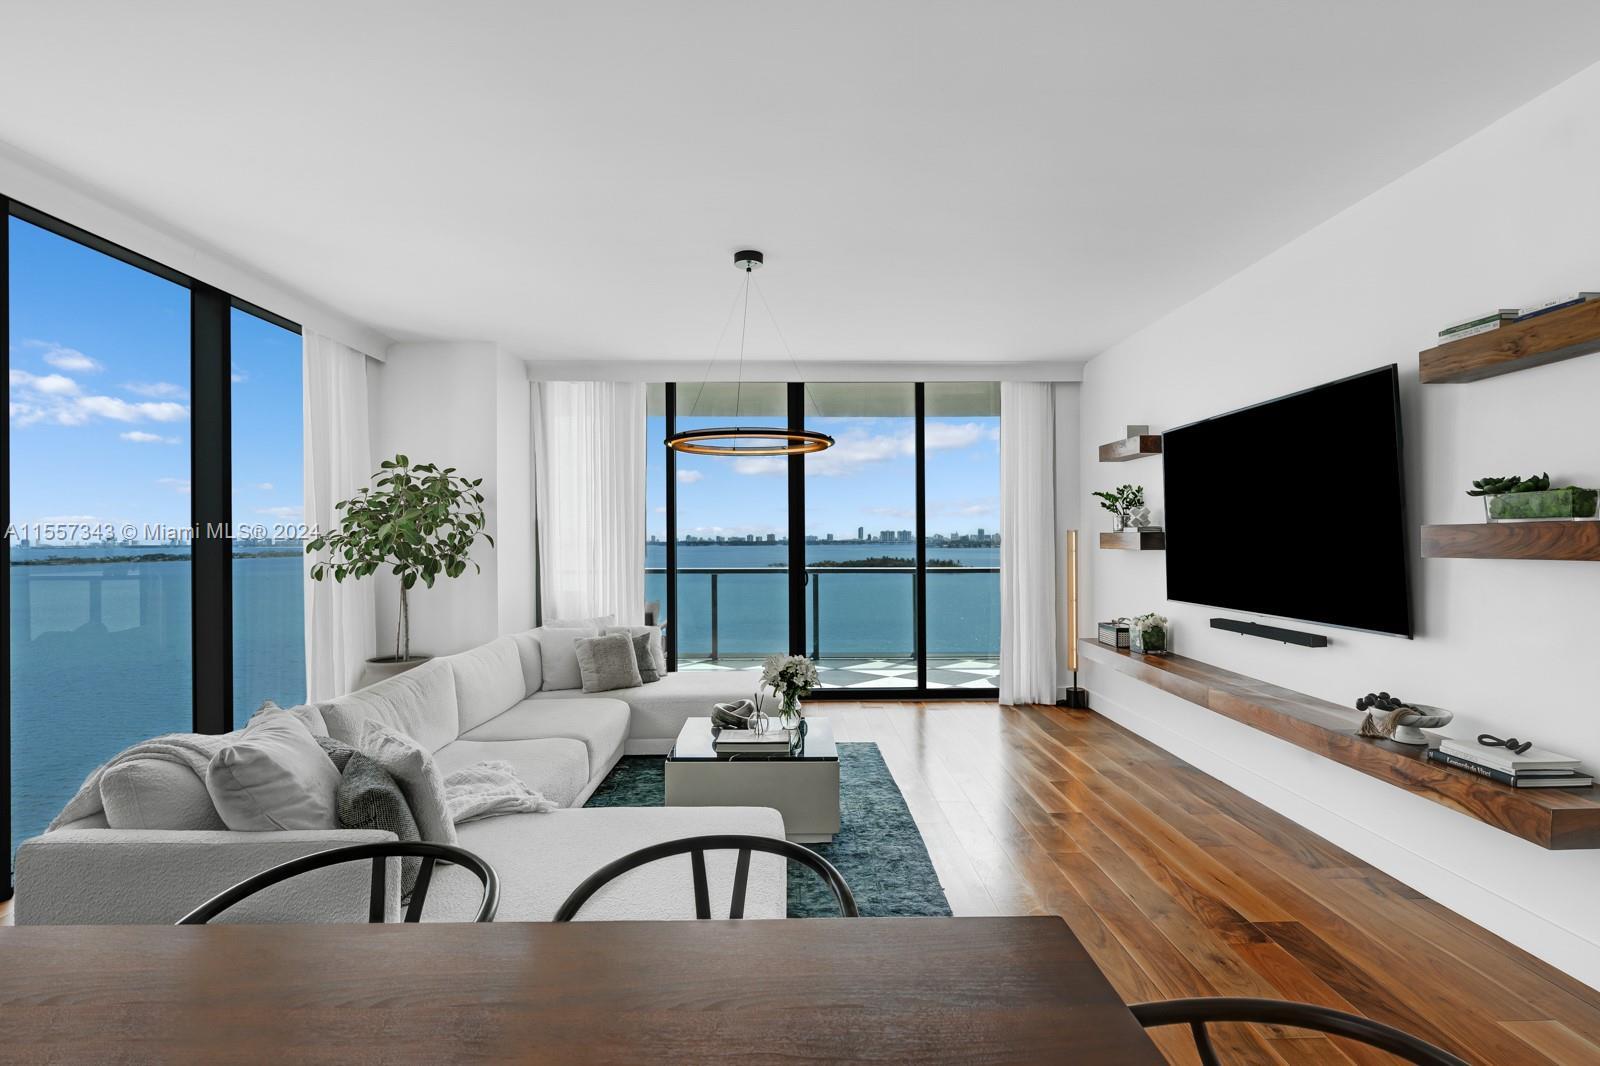 Step Inside with Me! Elysee is Edgewater’s newest premier waterfront address. Exuding sophistication